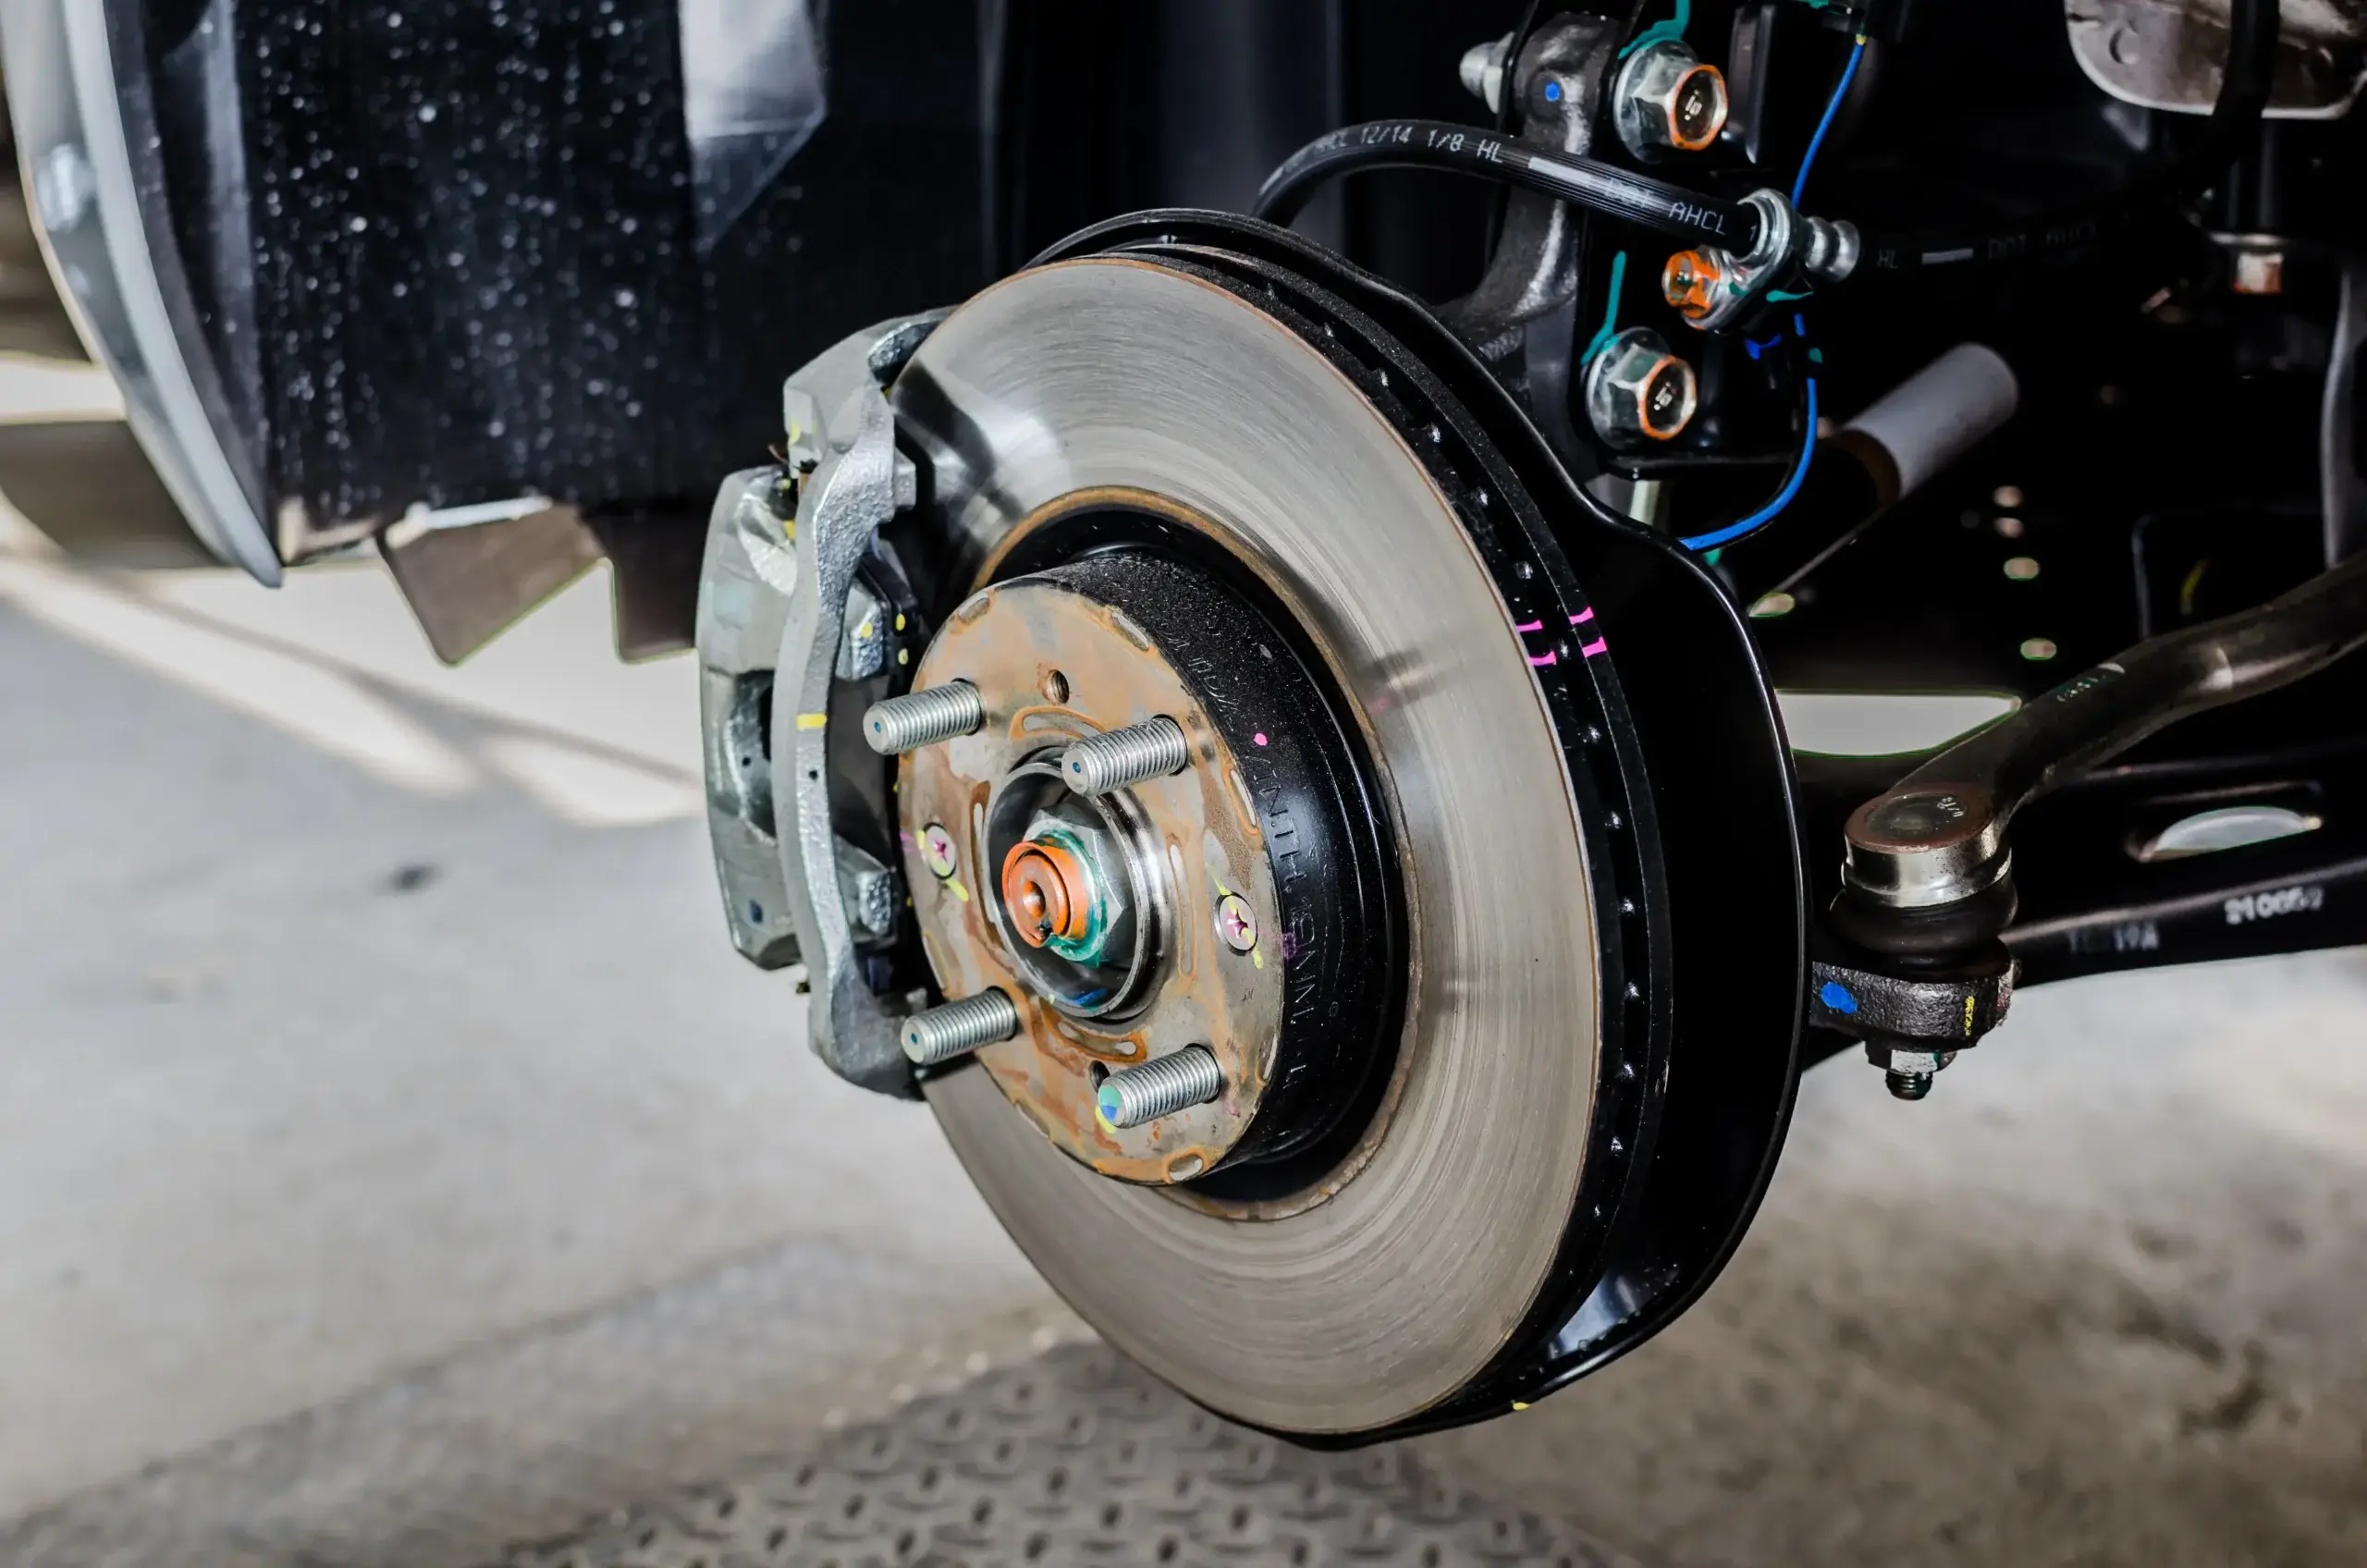 Mospart | The Benefits of Upgrading to Performance Brake Components